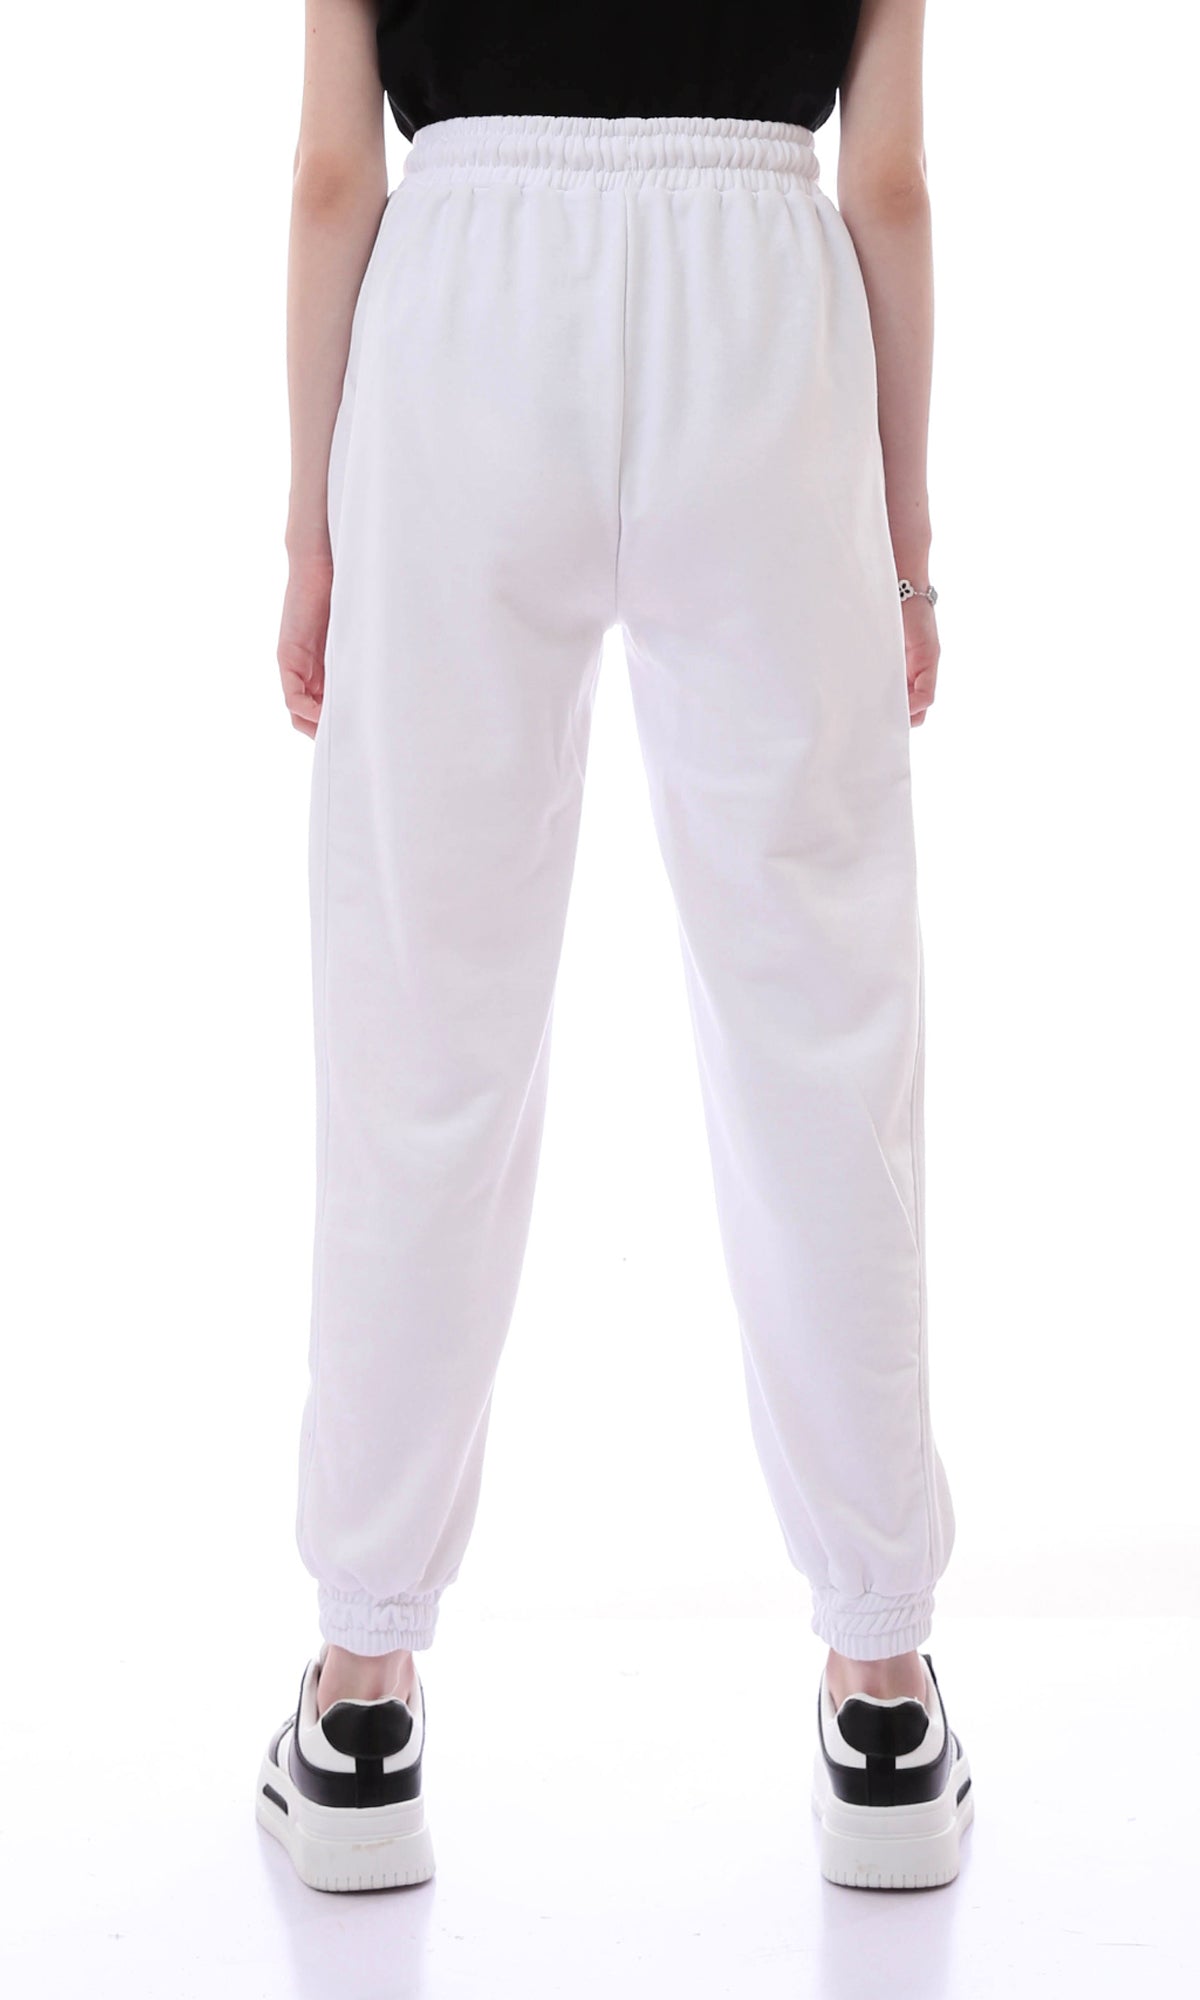 O165844 Comfy Solid Off-White Sweatpants With Elastic Waist Drawstring